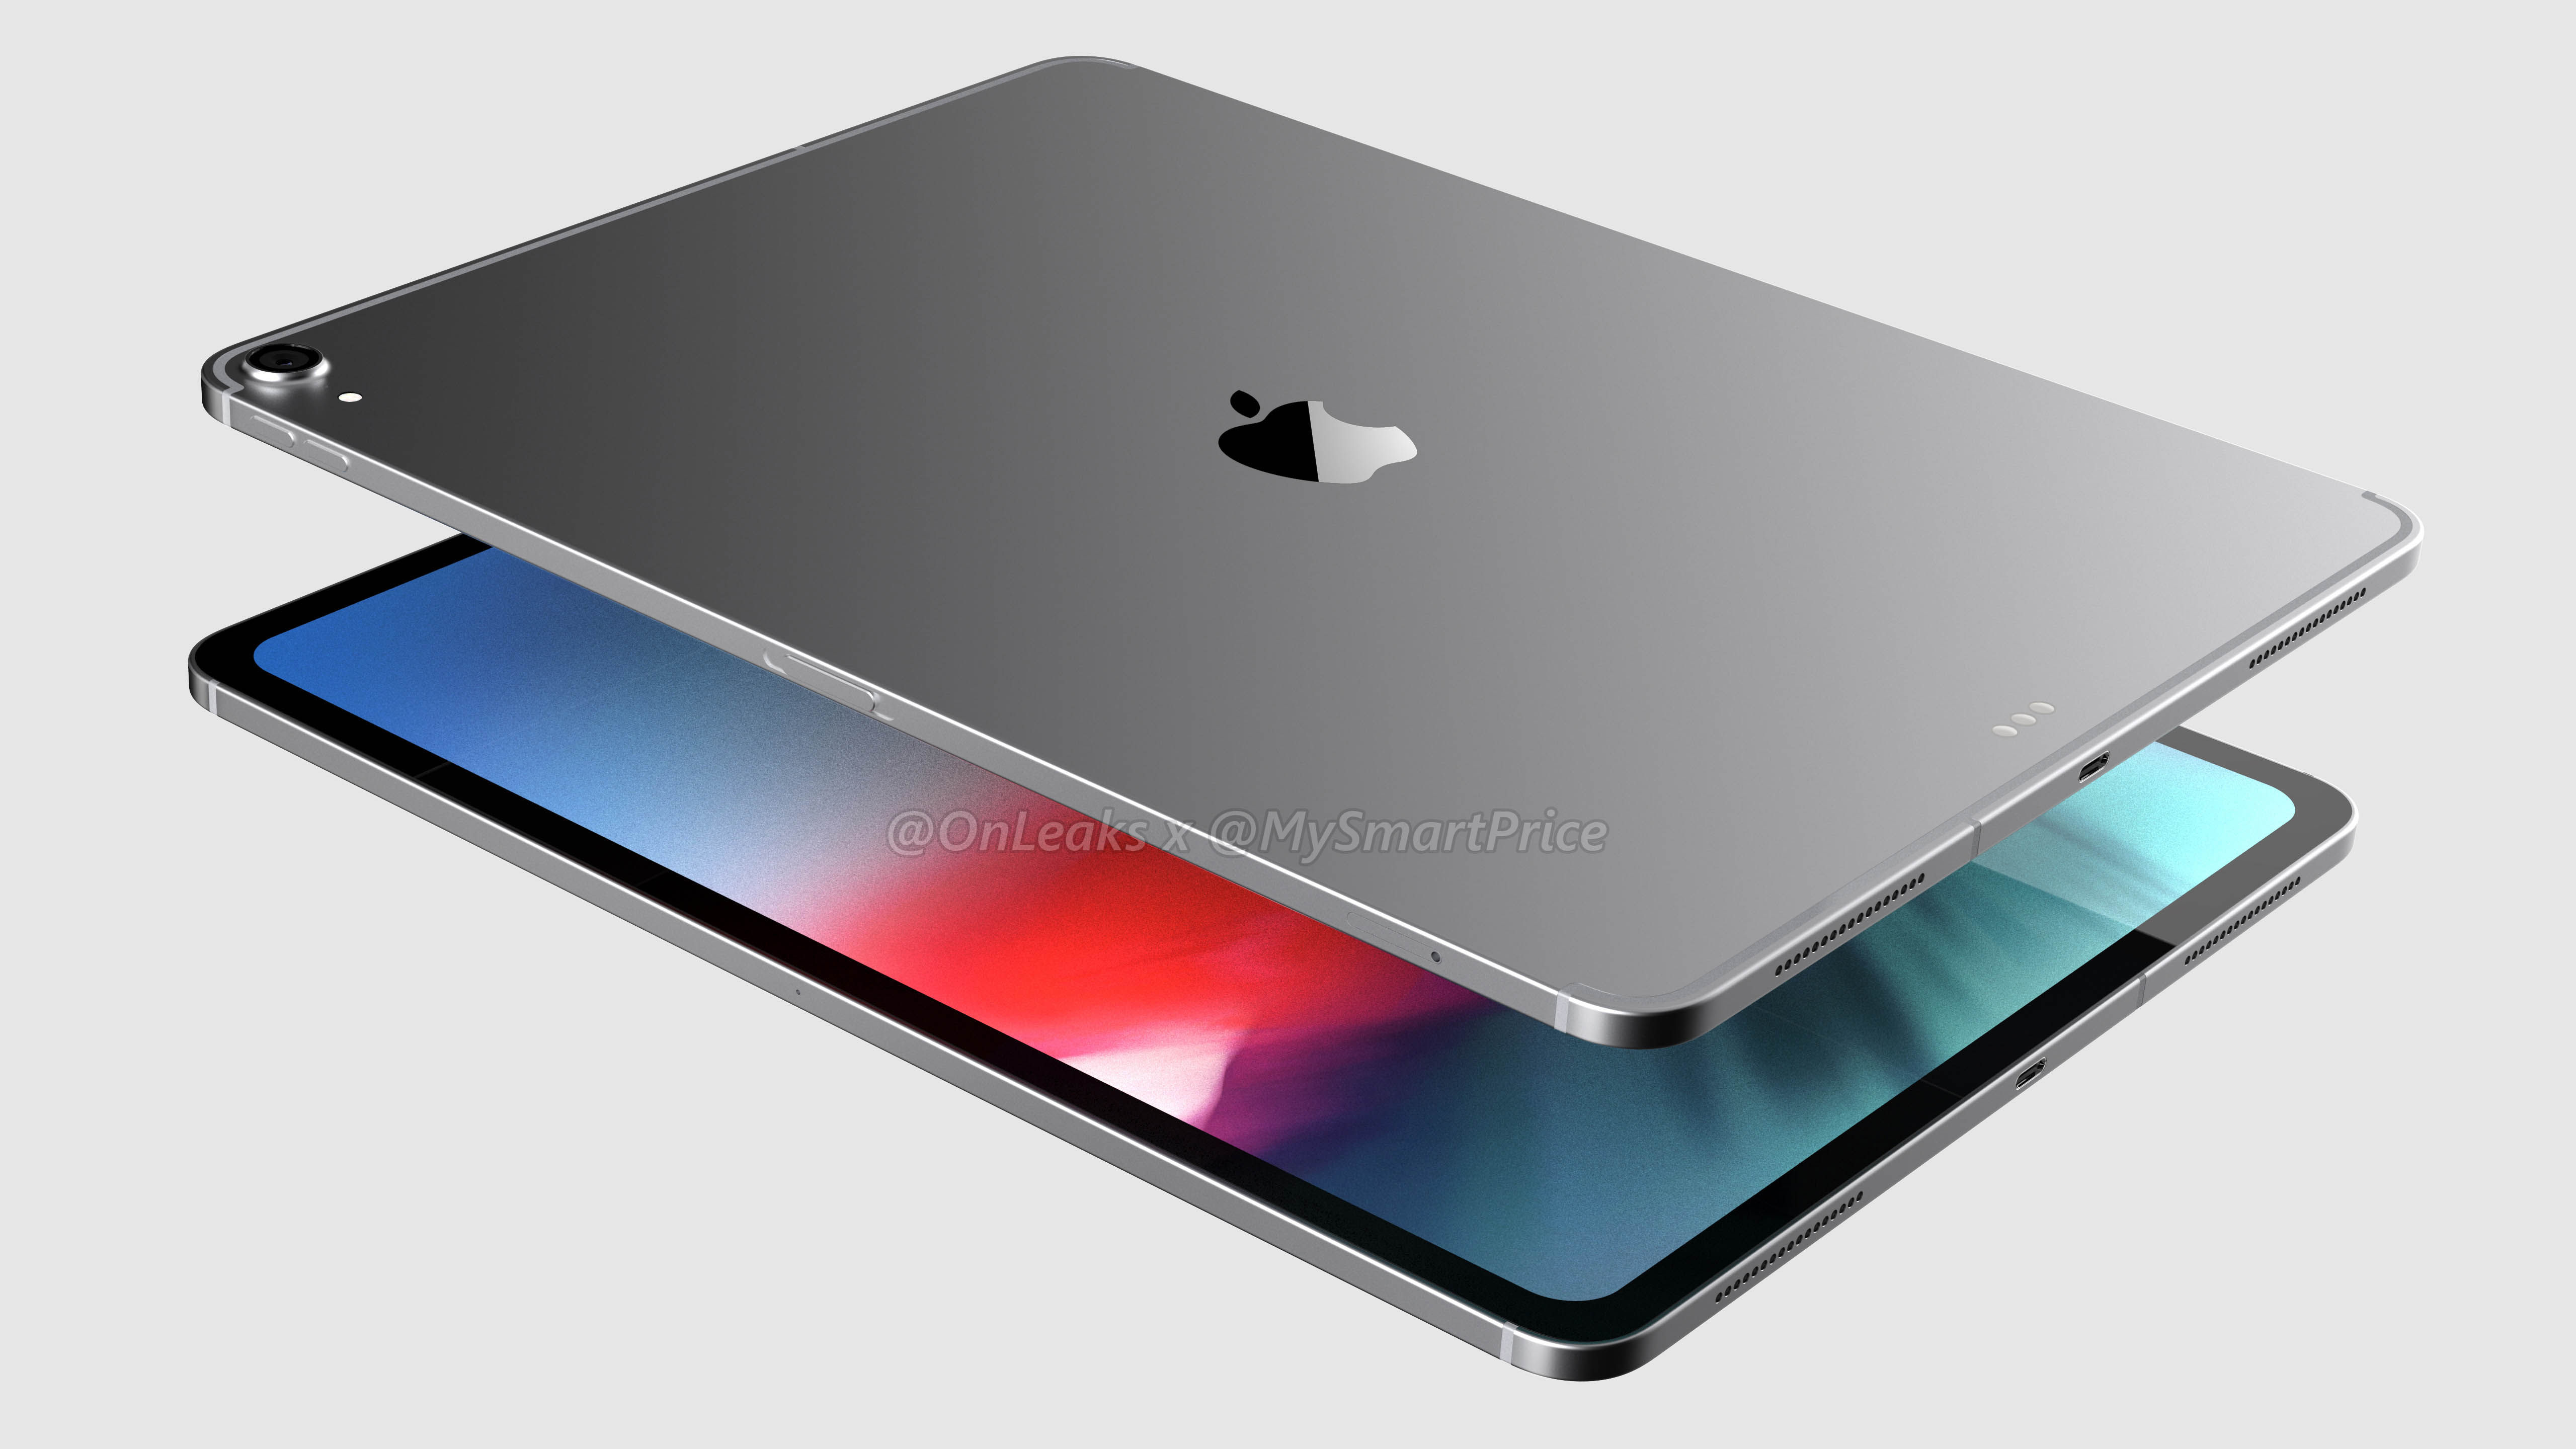 Apple iPad Pro 12.9 (2018) Price in India, Full Specification, Features